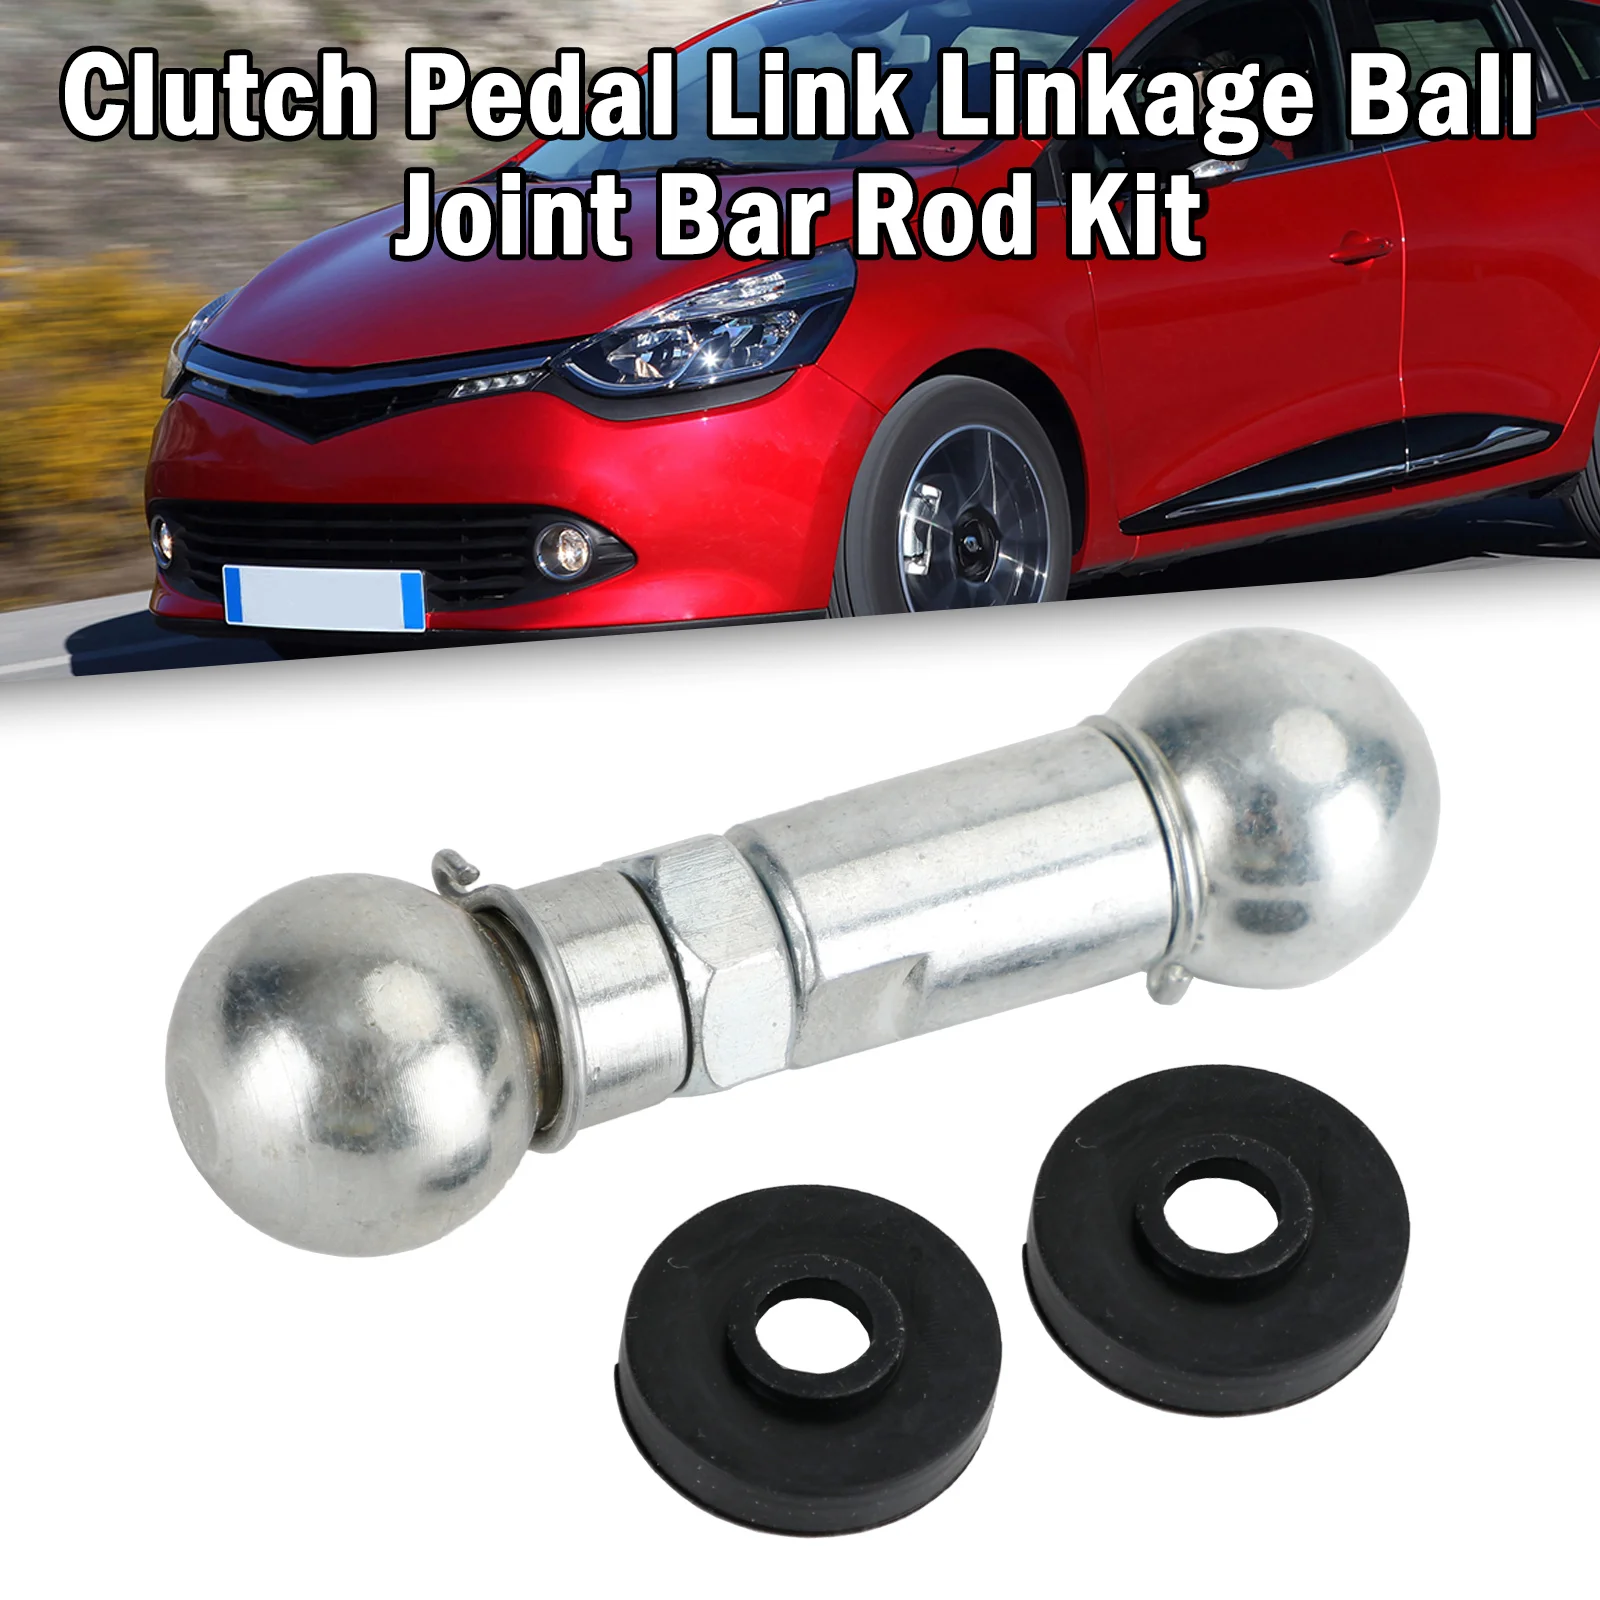 Areyourshop Clutch Pedal Link Linkage Ball Joint Bar Rod Kit For Renault Clio Twingo Kangoo Car accessories